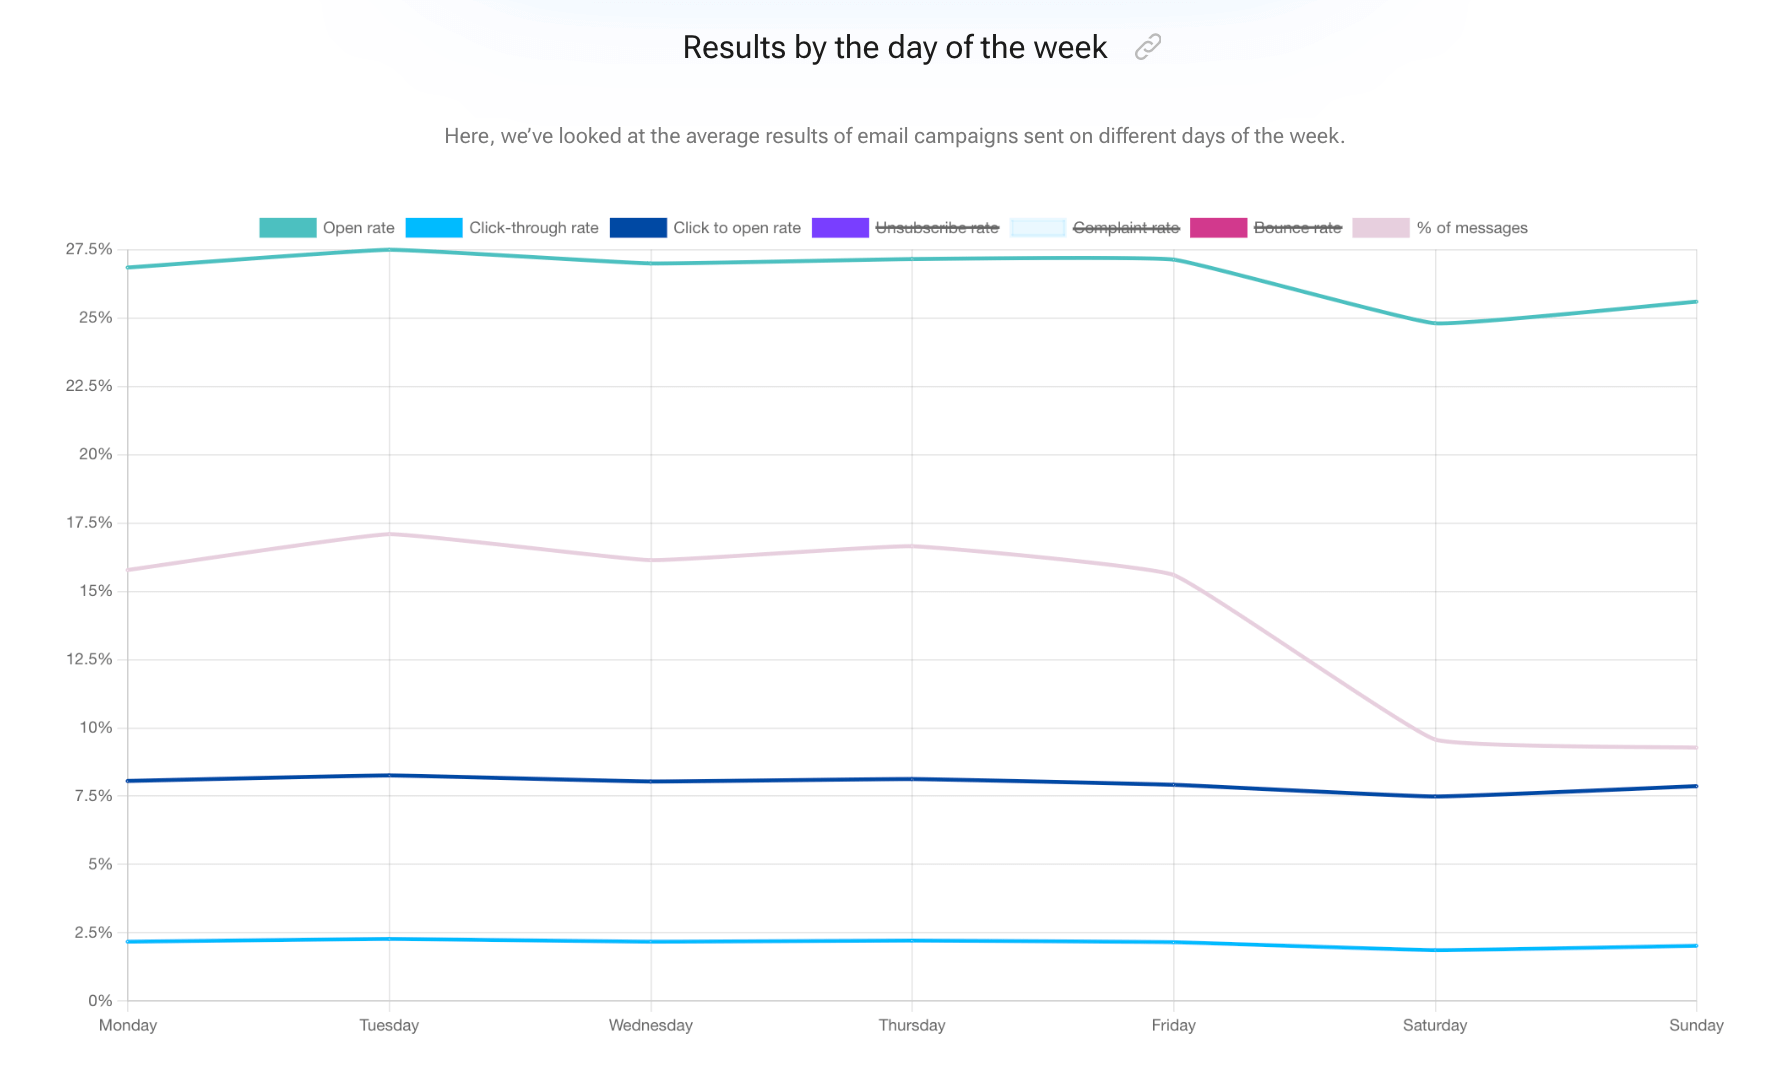 A chart showing OR, CTR, Click-to-open rate, and the percent of messages over the week. Most of the metrics have little performance variations with OR and the percent of messages dropped sharply on Saturday.